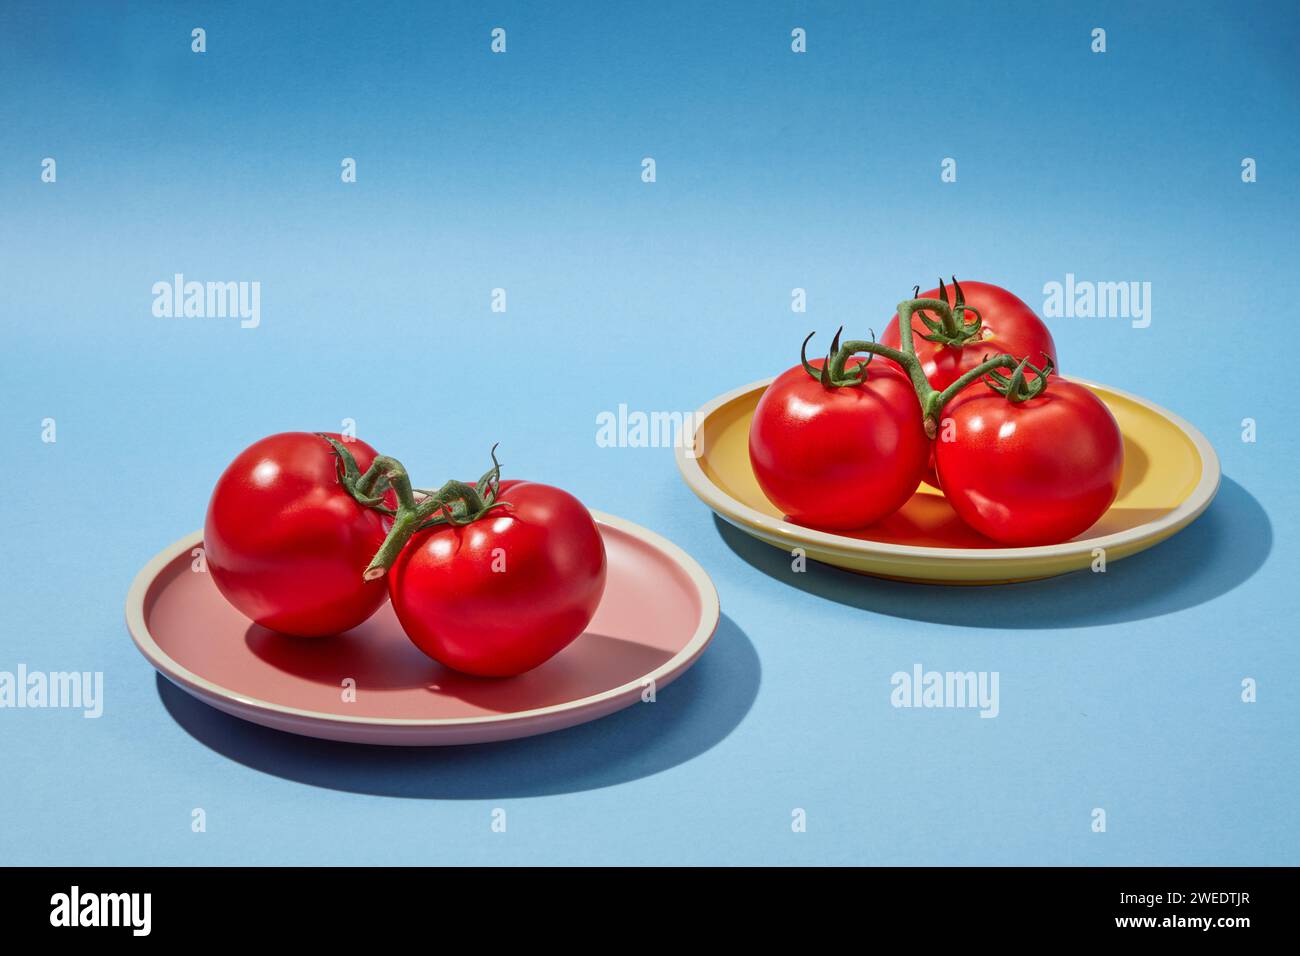 Scene for advertising cosmetic products of tomato extract - round plated containing red fresh tomatoes on a blue background. Tomatoes have a lot of nu Stock Photo